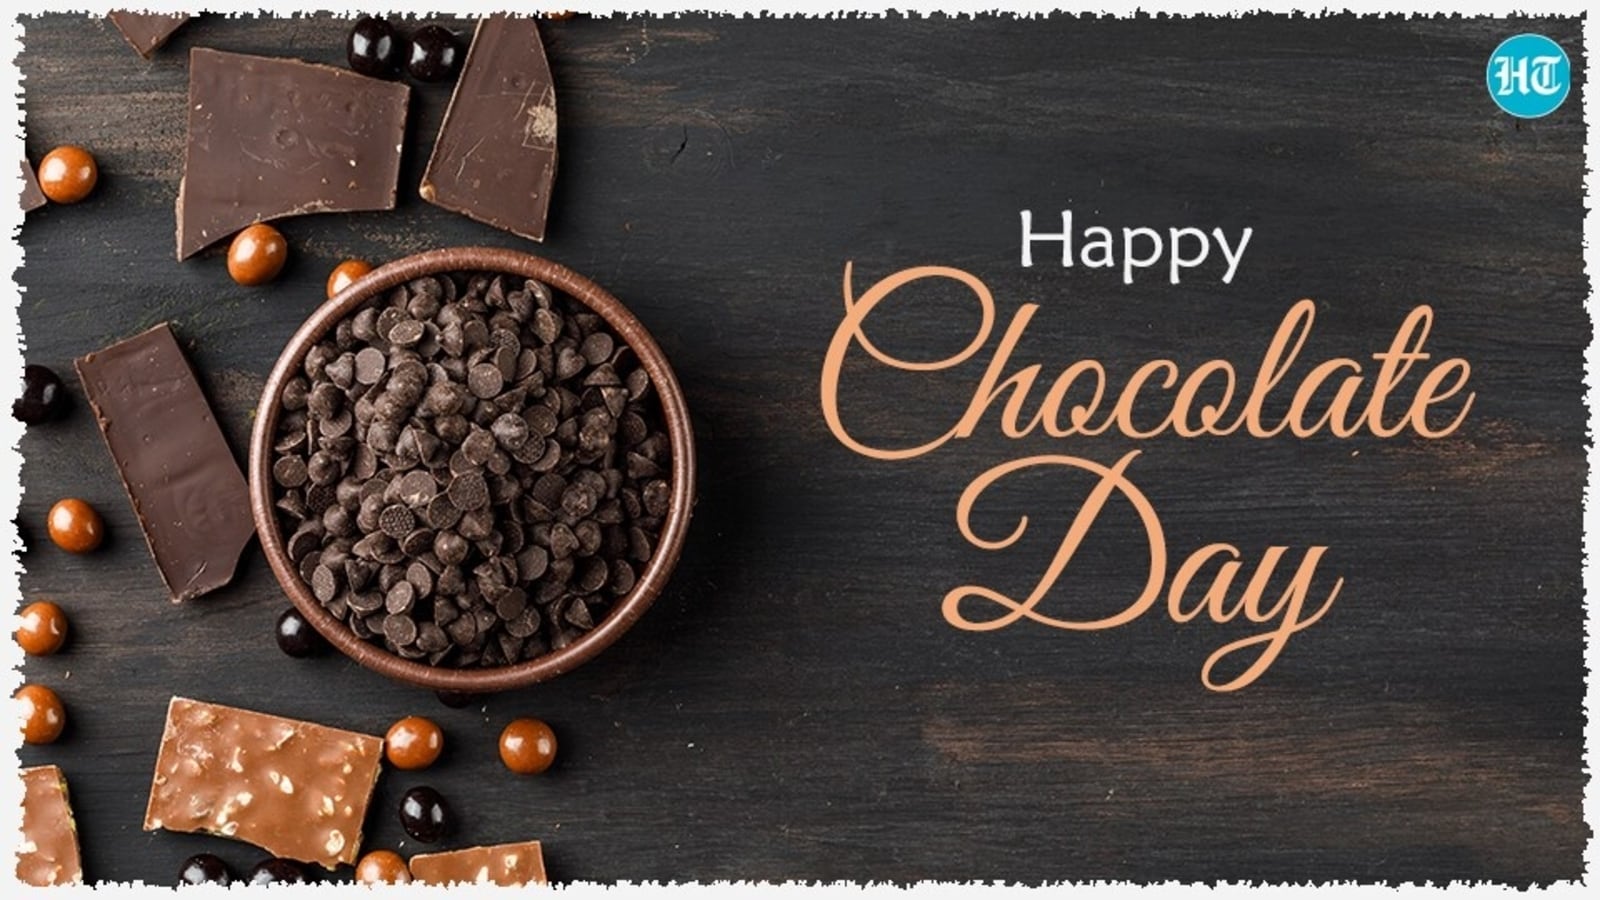 Collection of Over 999 Joyful Chocolate Day Images – Astonishing Set of Full 4K Happy Chocolate Day Images